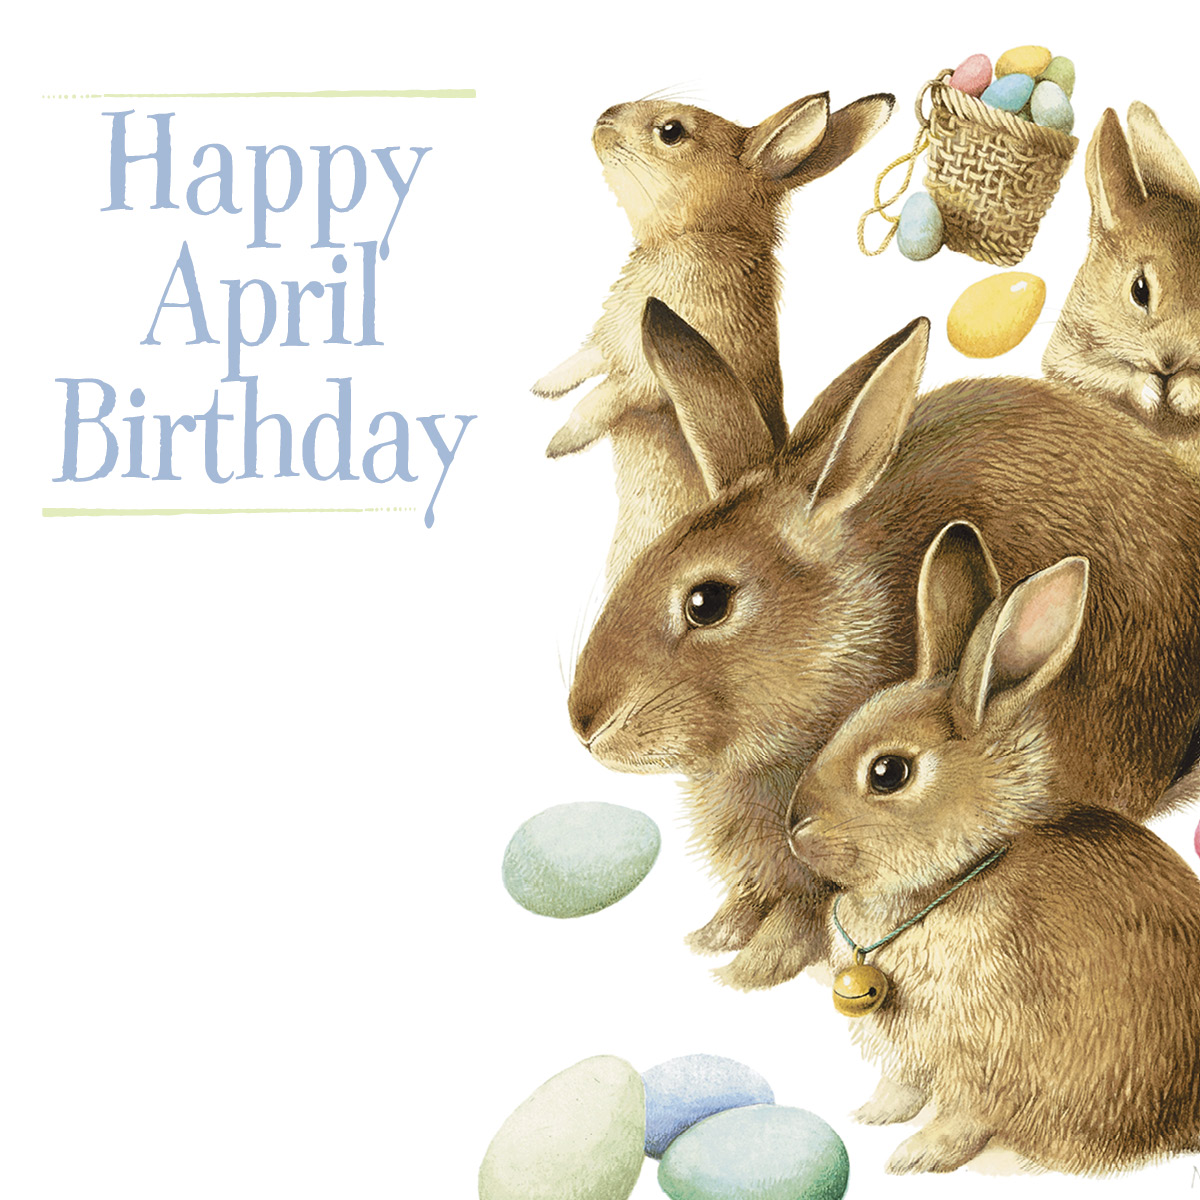 Happy April Birthday!  Tag a friend who is celebrating their birthday this month to wish them all the best.  

(Pictured: 'Easter Bunnies in Training ' by Marjolein Bastin - marjoleinbastin.com) 

#happyaprilbirthday #aprilbirthday #happybirthday #marjoleinbastin